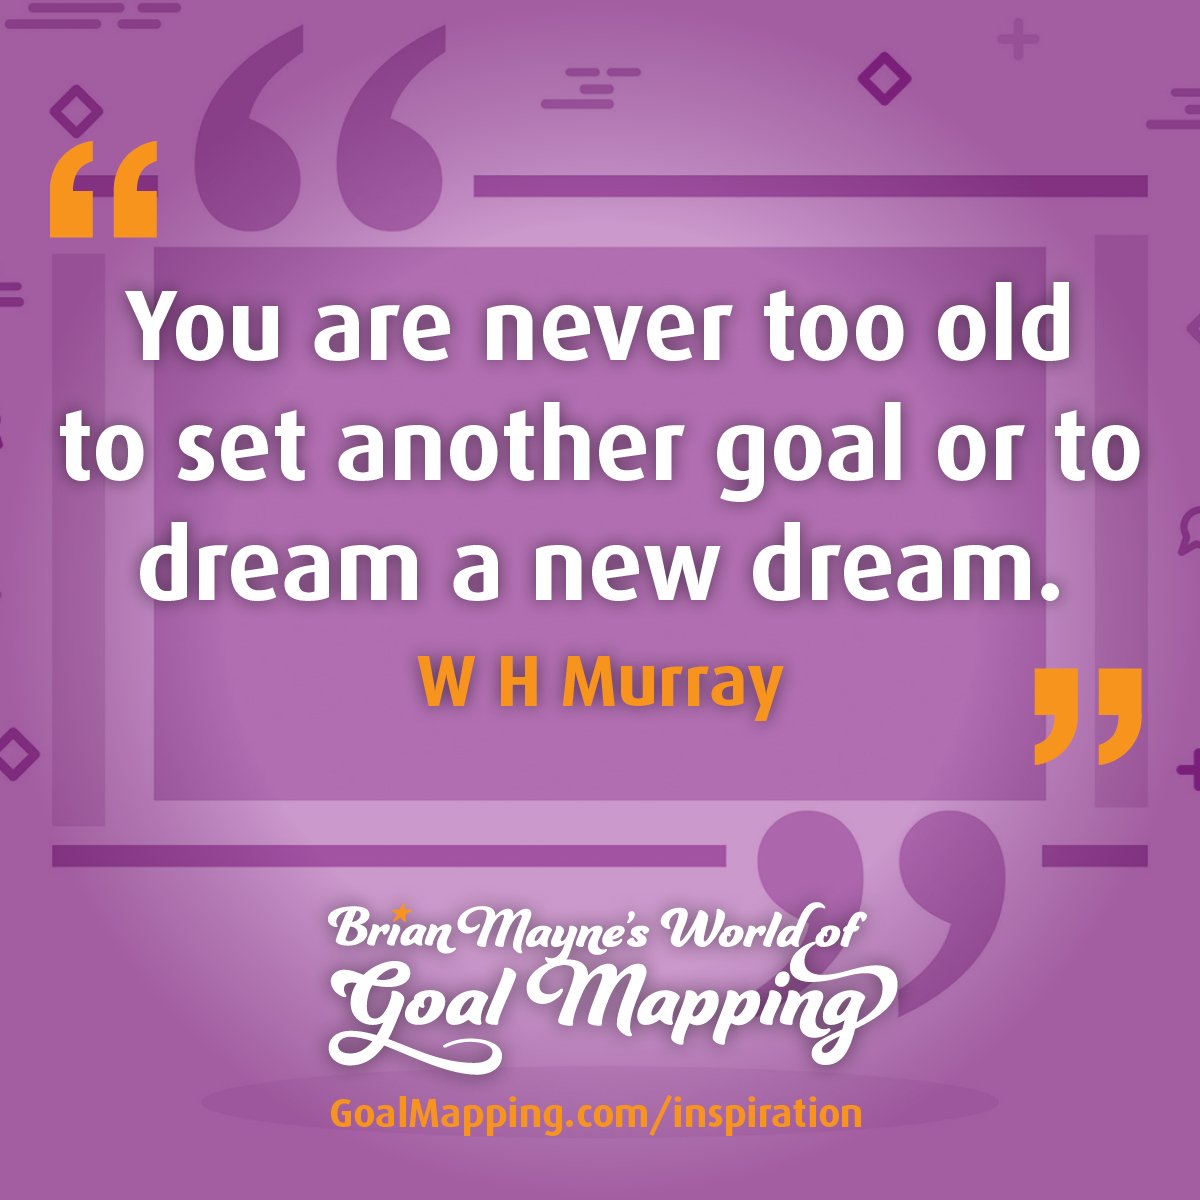 "You are never too old to set another goal or to dream a new dream." W H Murray